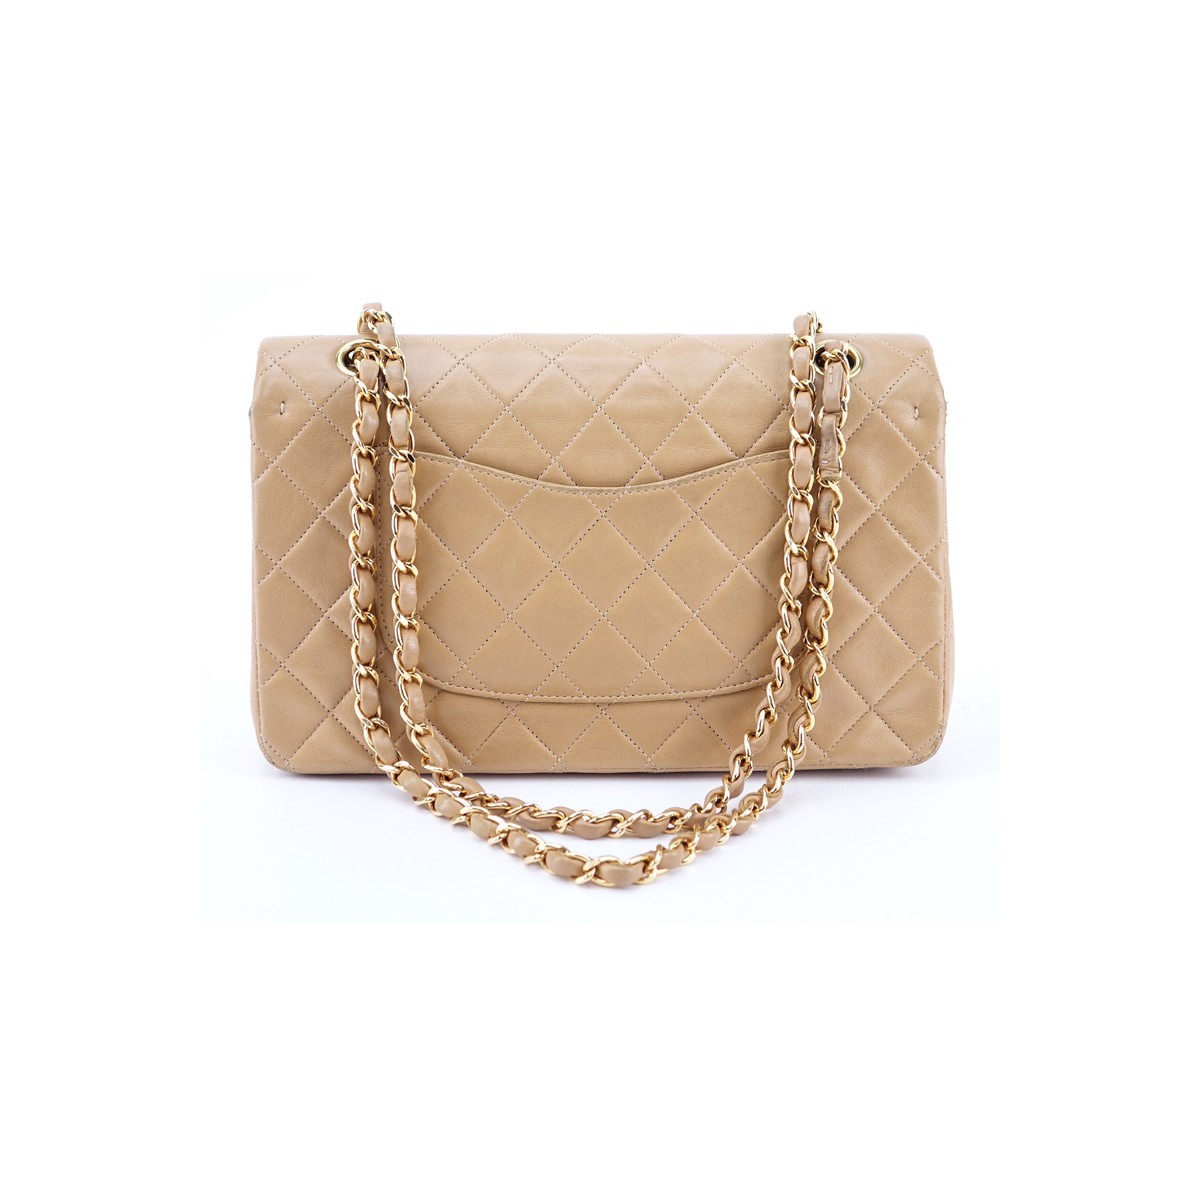 Chanel Dark Beige Quilted Leather Classic Double